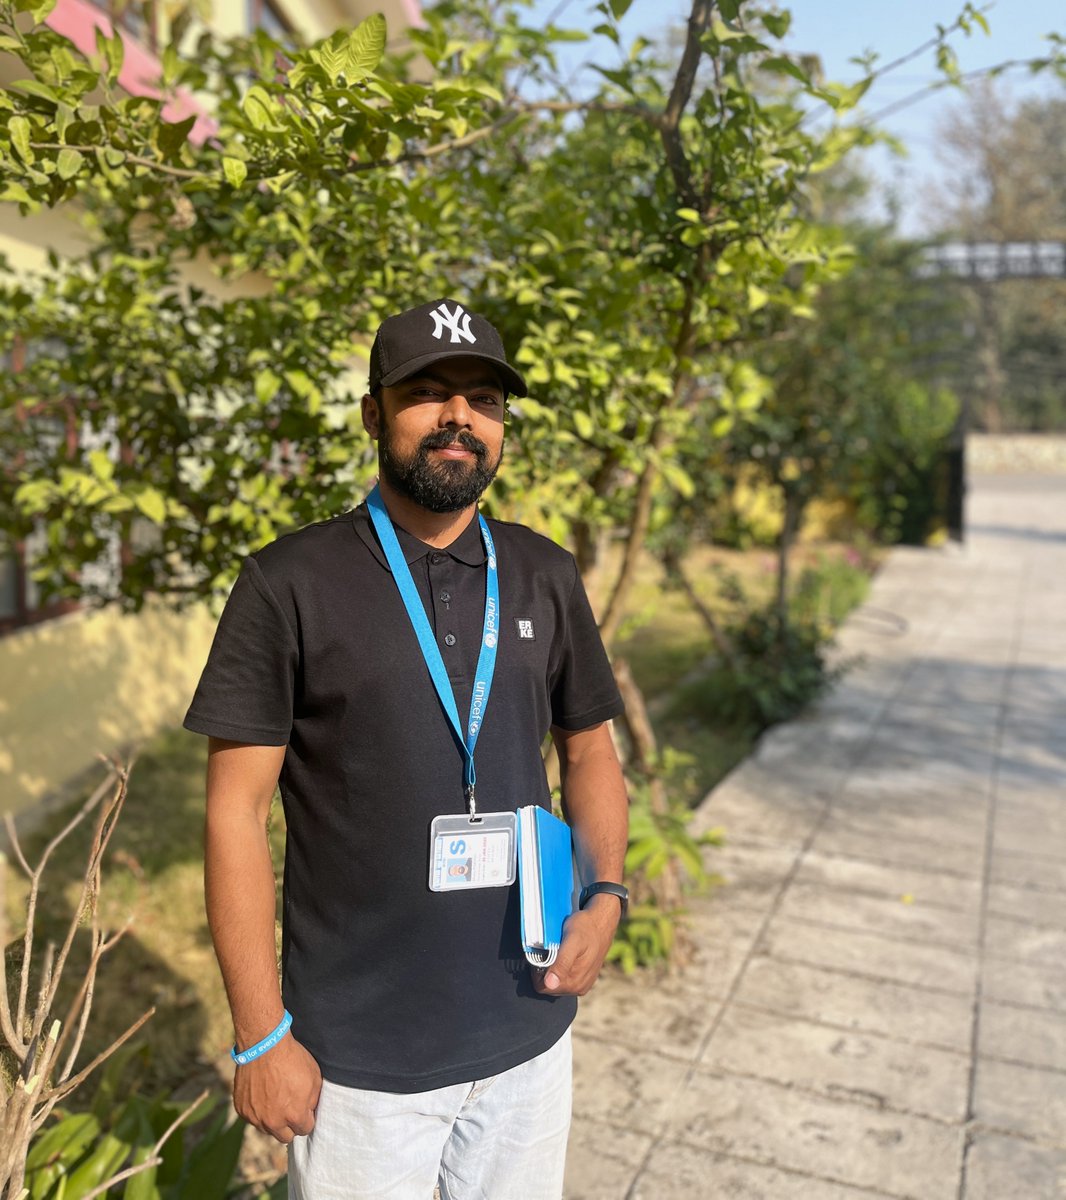 Meet Bhanu Phokrel, a national #UNVolunteer Specialist with @unicef_nepal. As a Health Data & Info Technician, Bhanu excels in optimizing systems & analysis for better health outcomes. From data tool adaptation to analysis & quality assurance, Bhanu is committed to #HealthForAll.